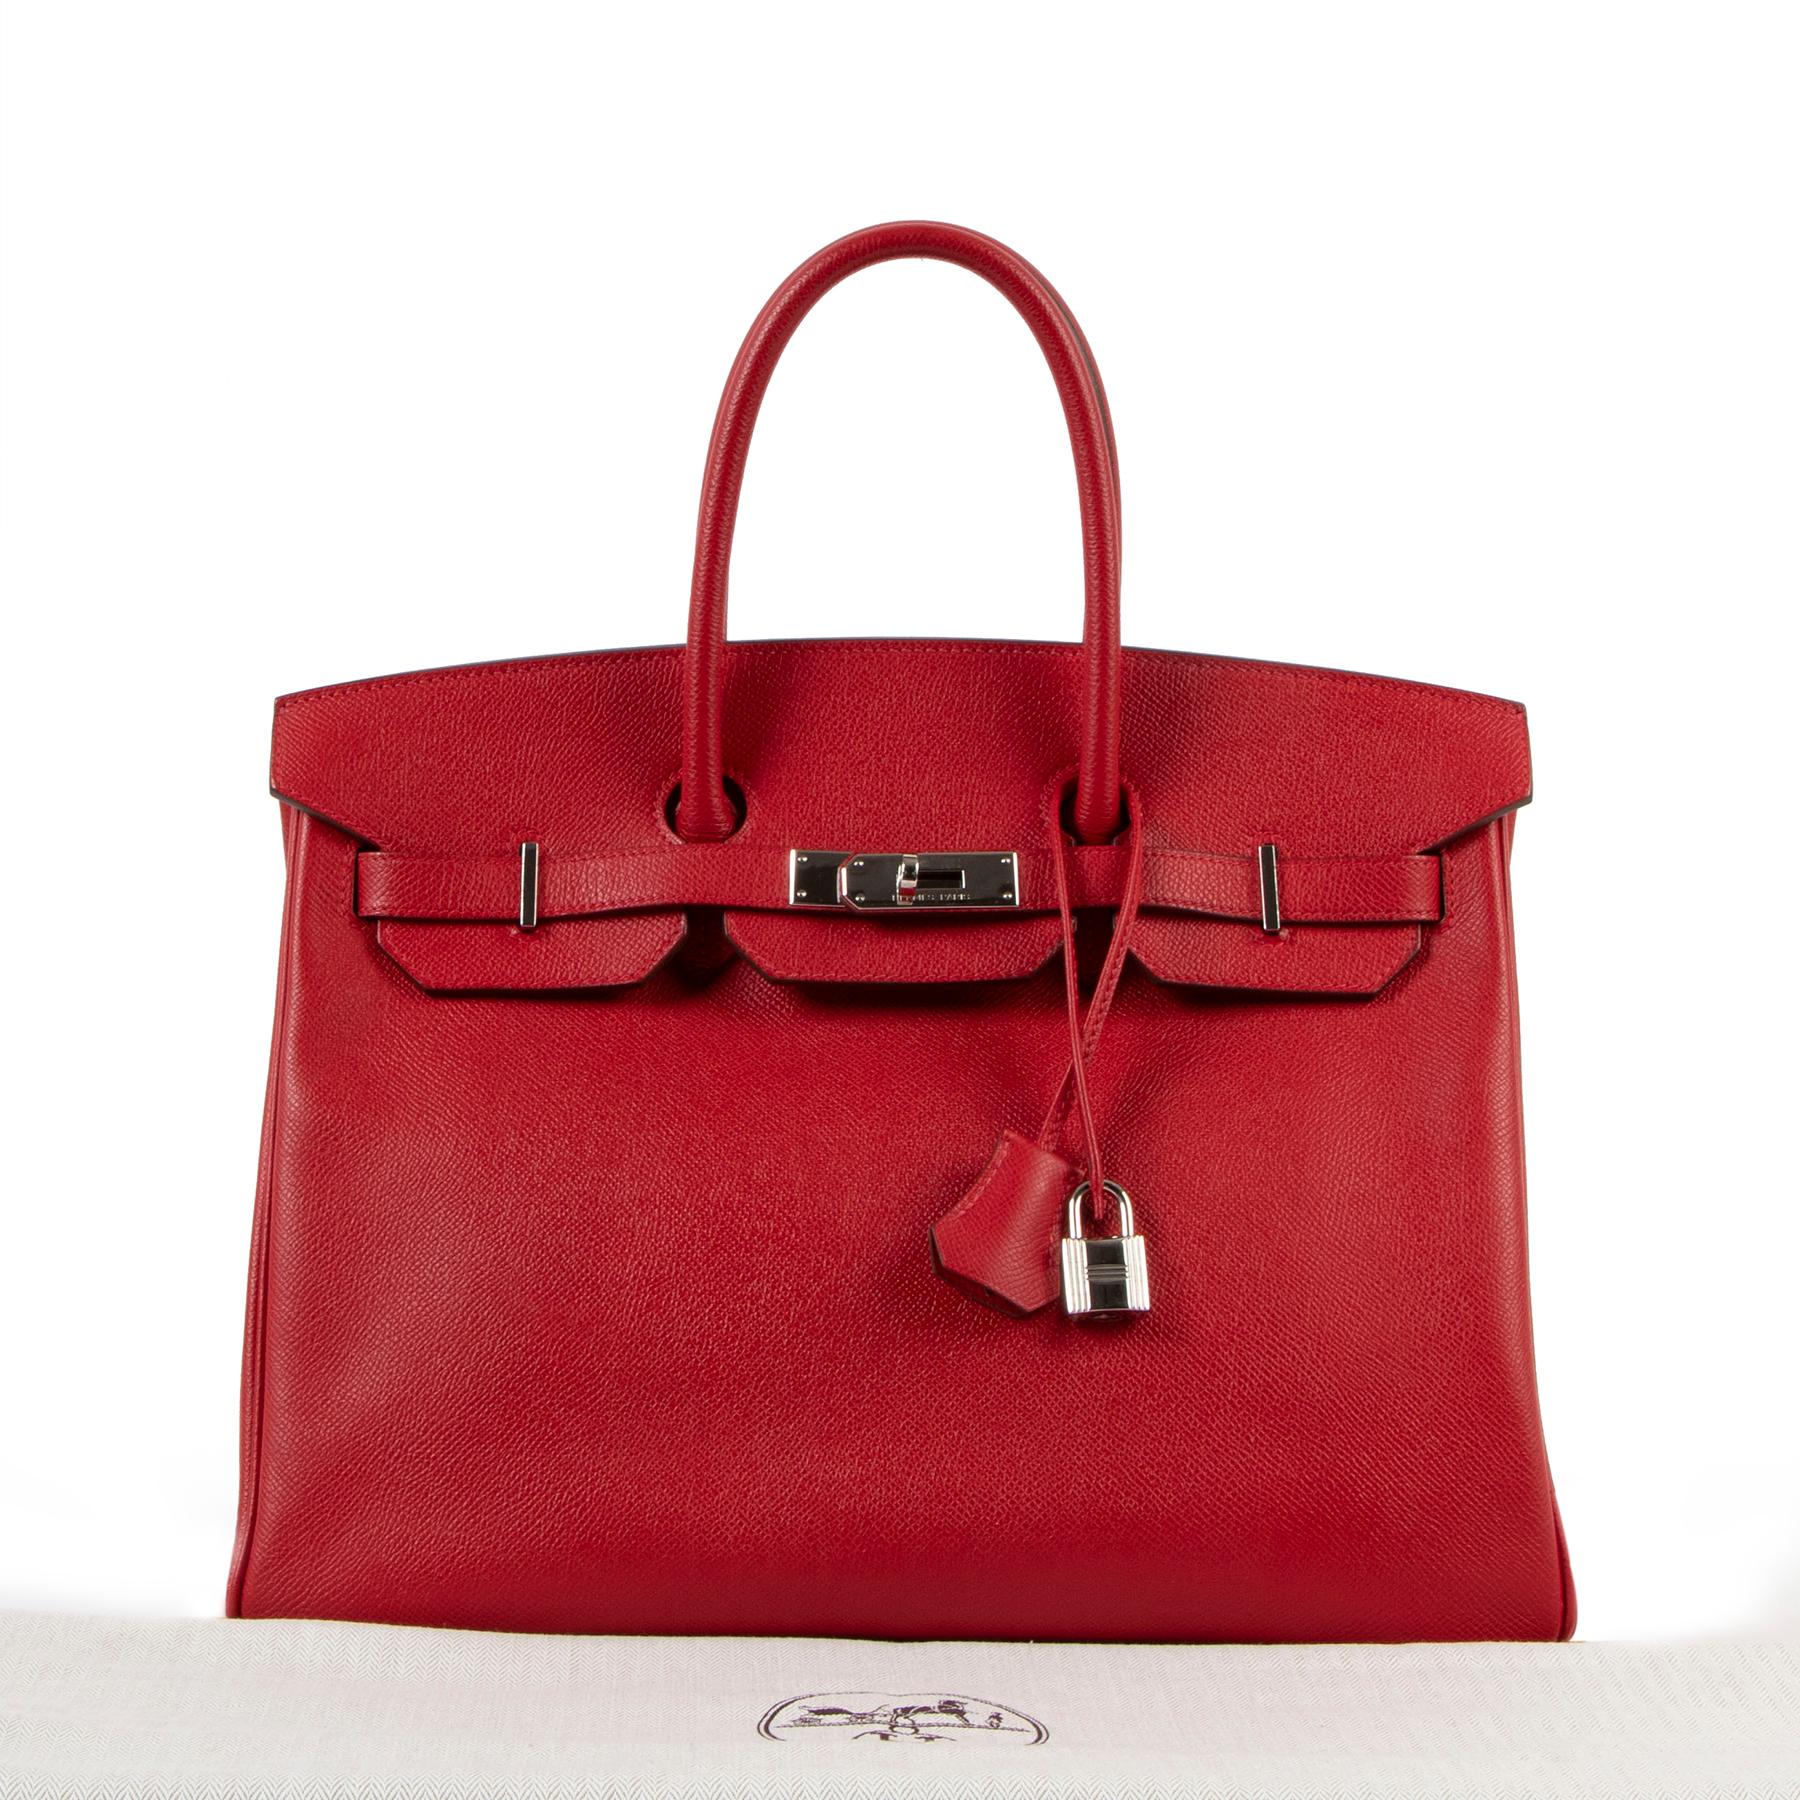 Hermès Birkin 35 Rouge Casaque Epsom Palladium Hardware

This Birkin is one of the most sought-after handbags worldwide. This refined combination of 